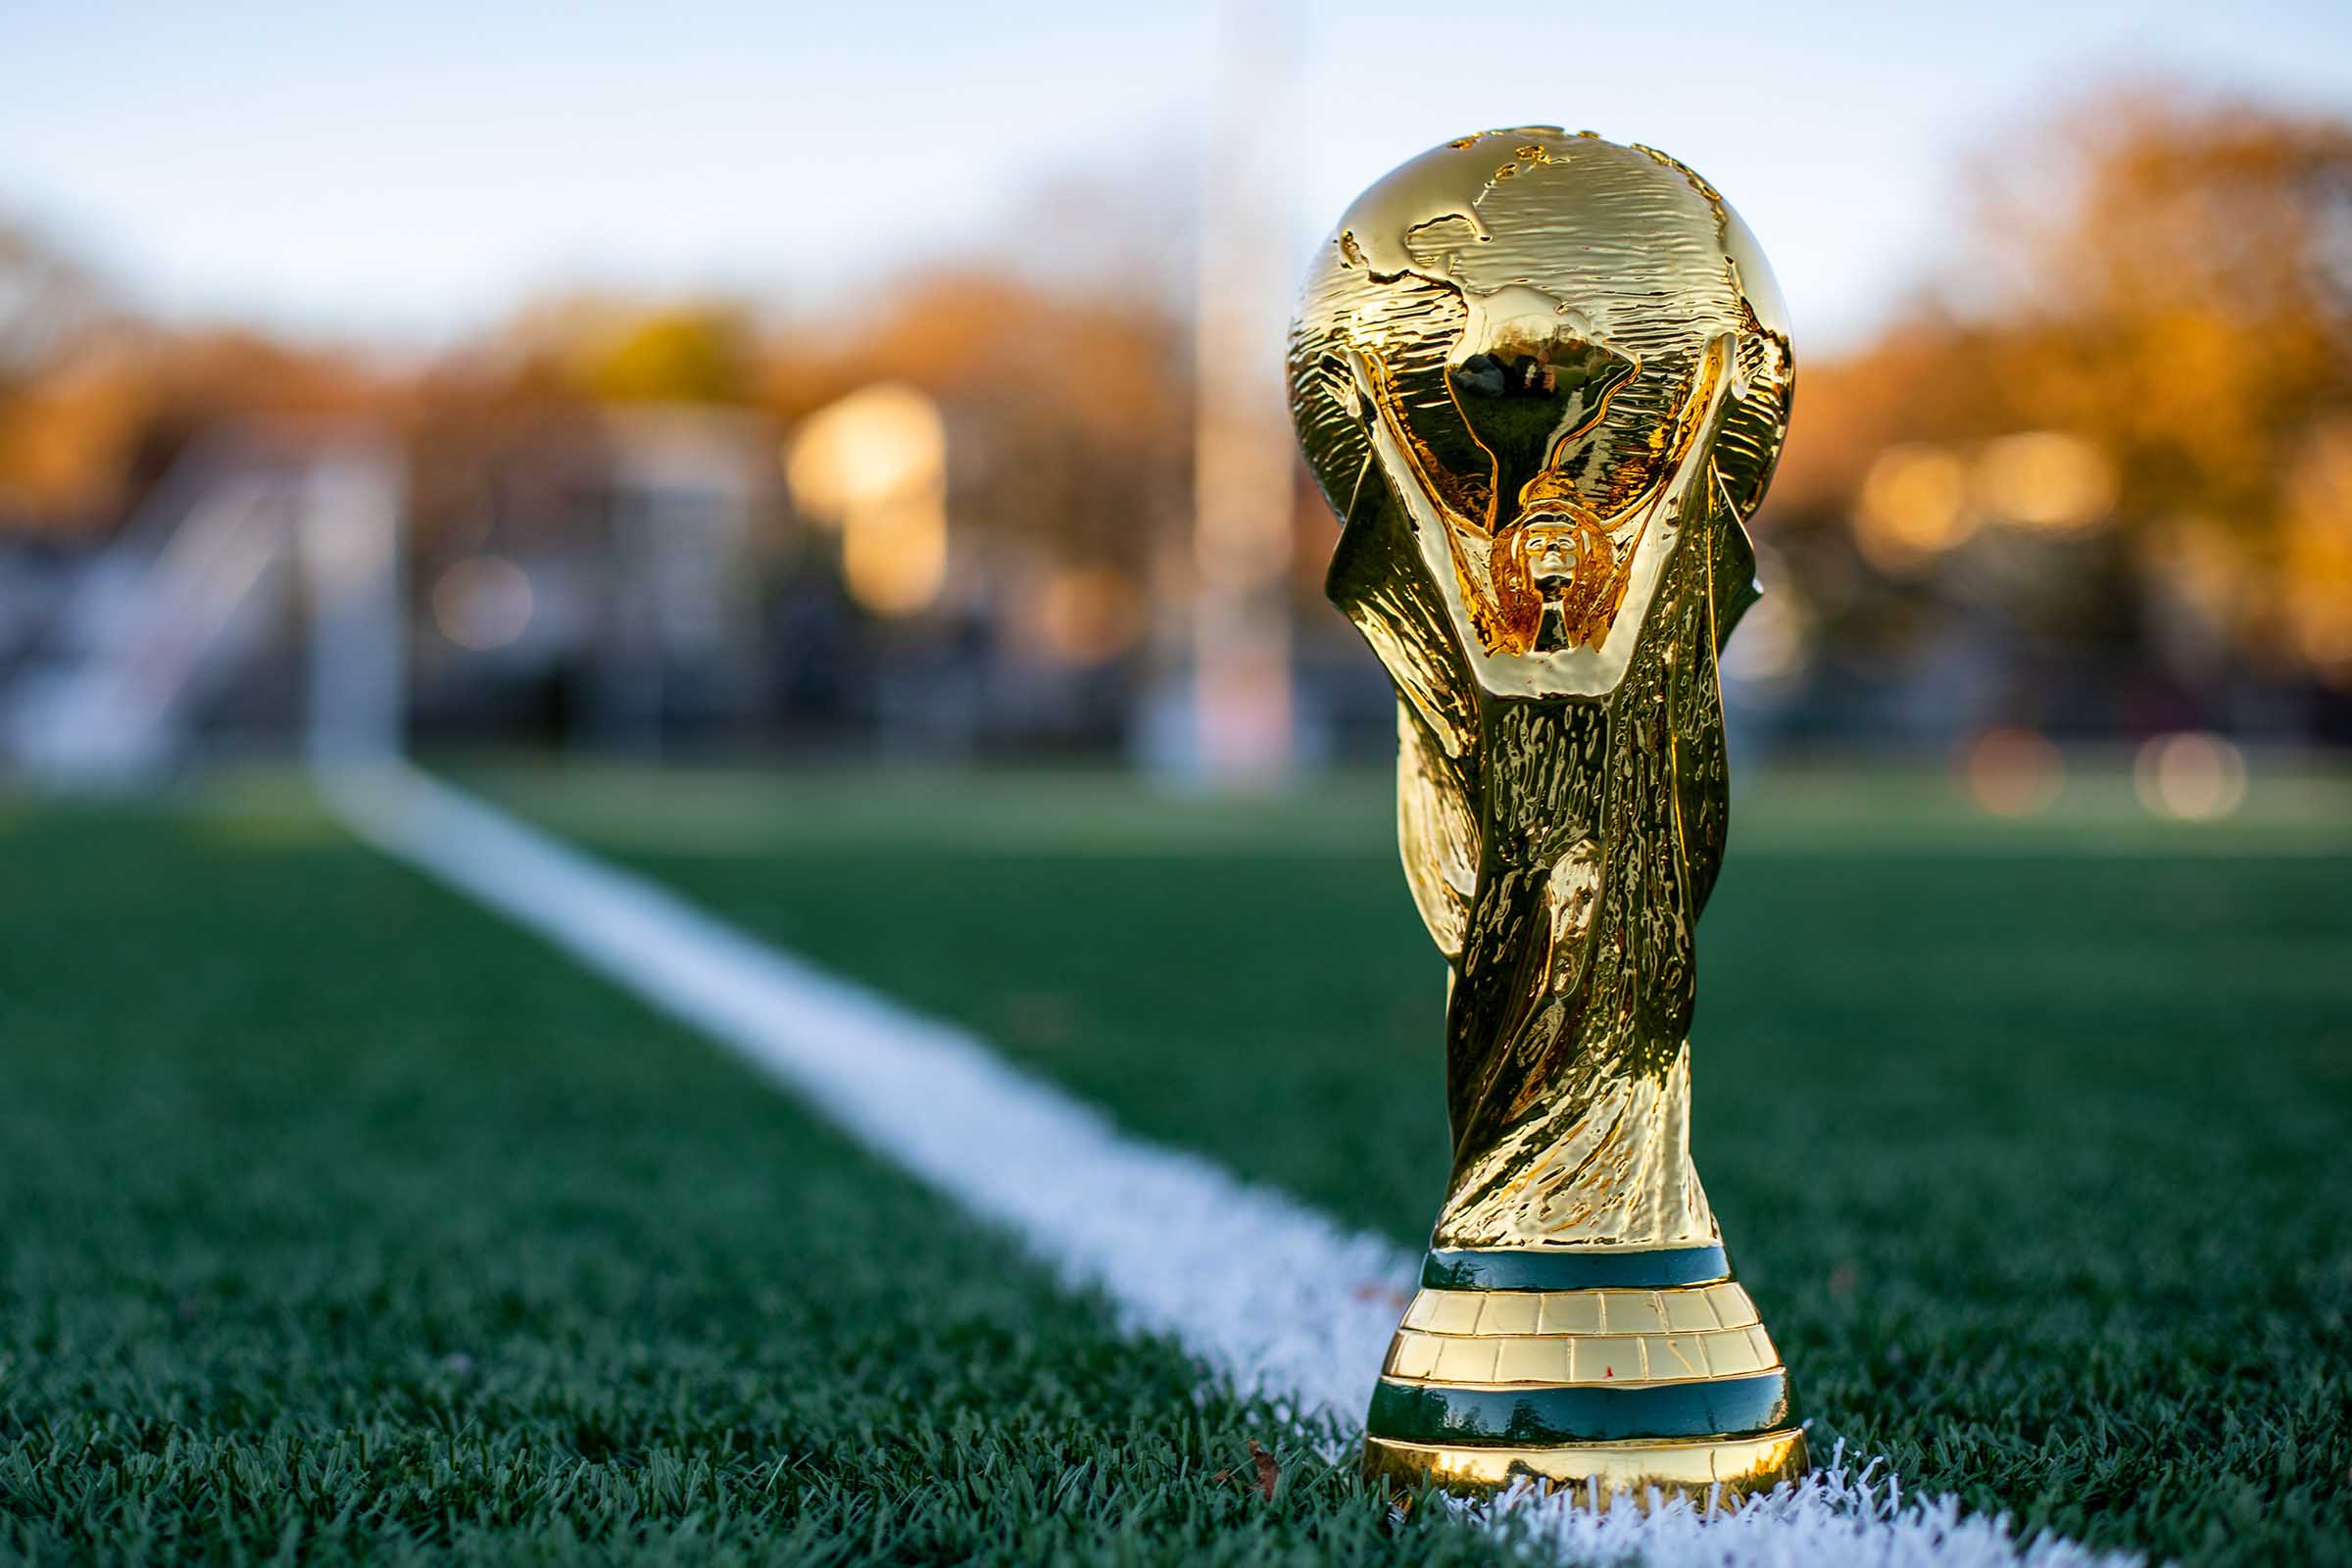 Miami Is Set To Host The World Cup 2026 – How Will This Affect Real Estate Values?